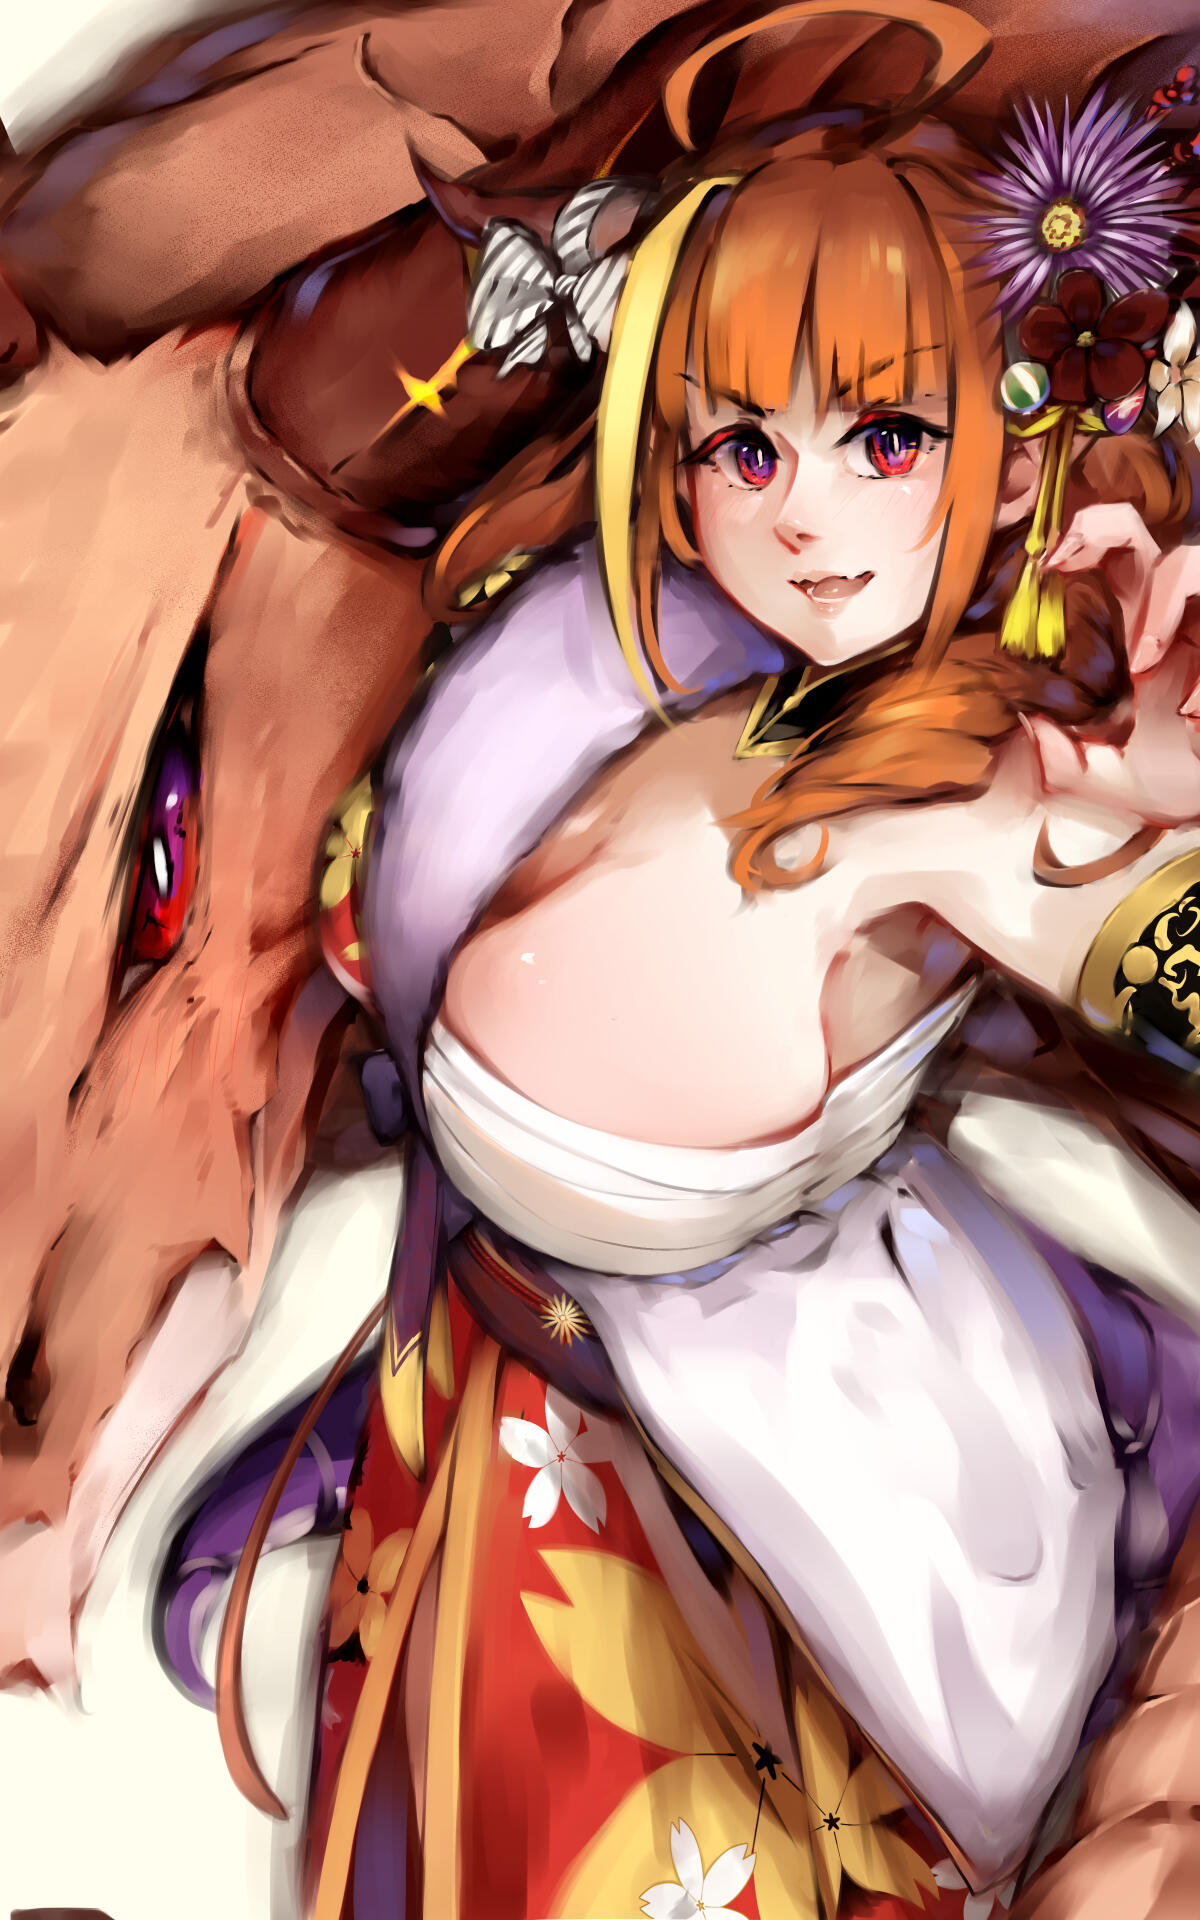 Digital fanart of Kiryu Coco, a dragon girl and Vtuber from Hololive, wearing Asian clothes and having an actual dragon behind her. Celebrational artwork for the Chinese zodiac 